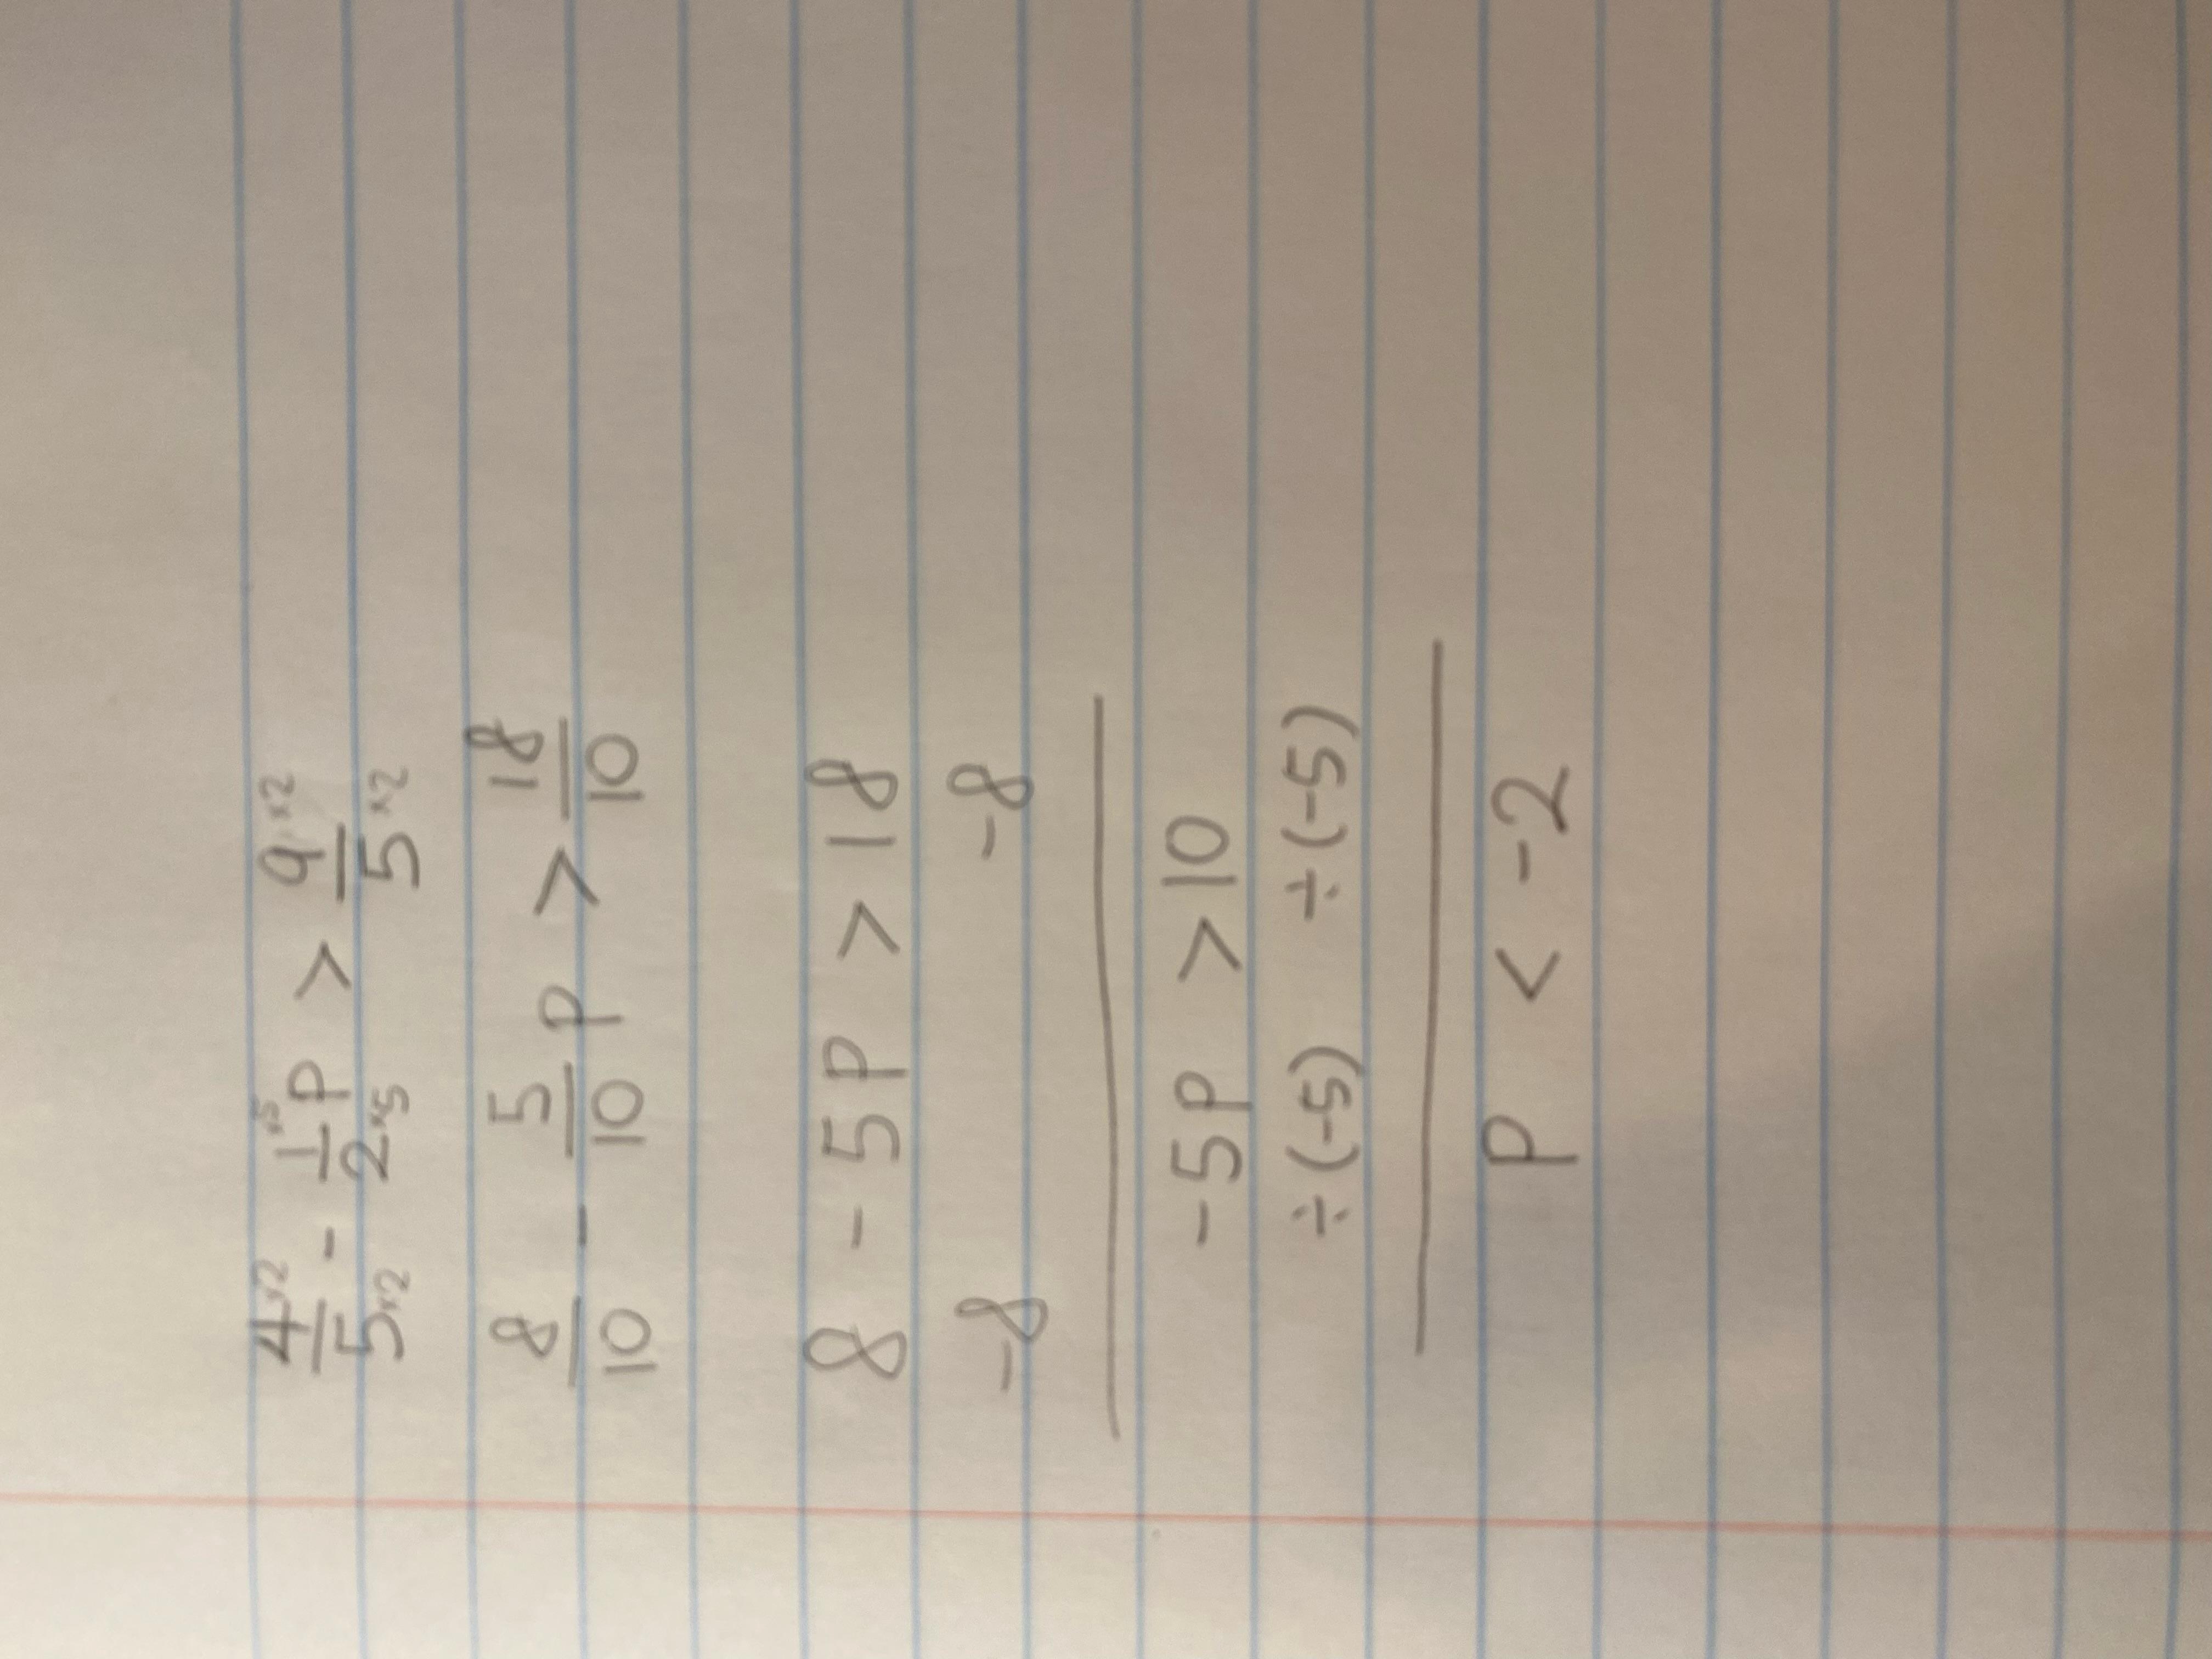 The Inequality 4/5-1/2p&gt;9/5 Is Givin. Solve The Inequality For P